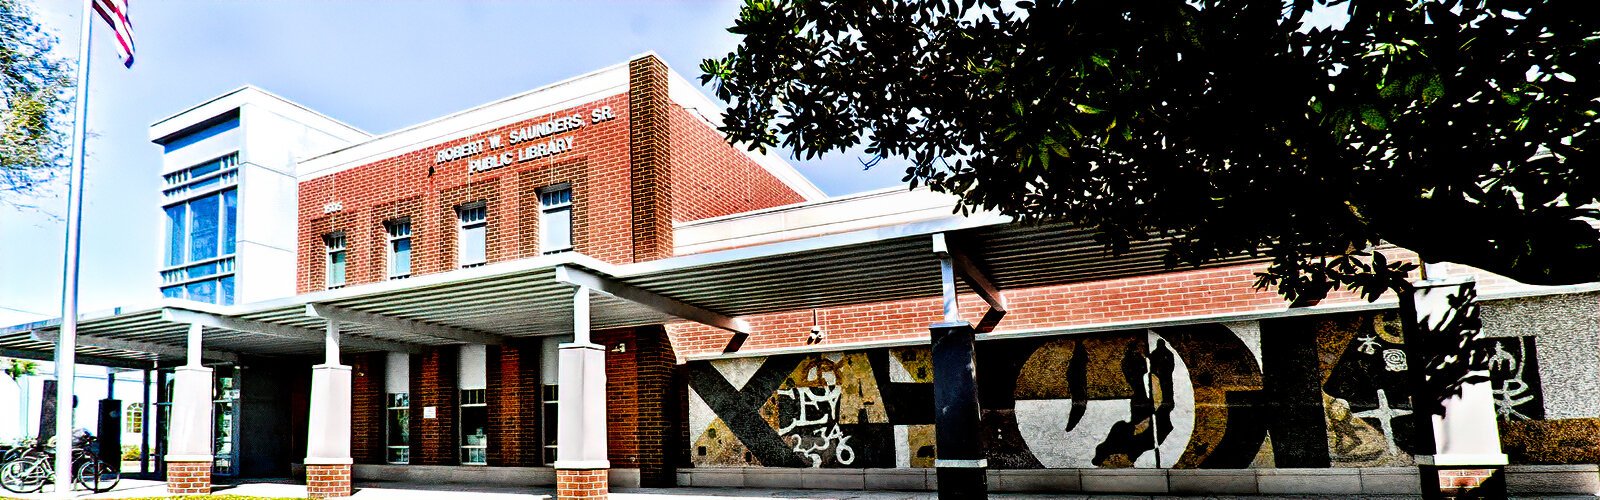 The Robert W. Saunders, Sr. Public Library is one site on the newly-launched Tampa Soulwalk heritage trail. Originally known as the Ybor City Branch Library, the facade is adorned with the mosaic“Symbols of Mankind" by Tampa native Joe Testa-Secca.